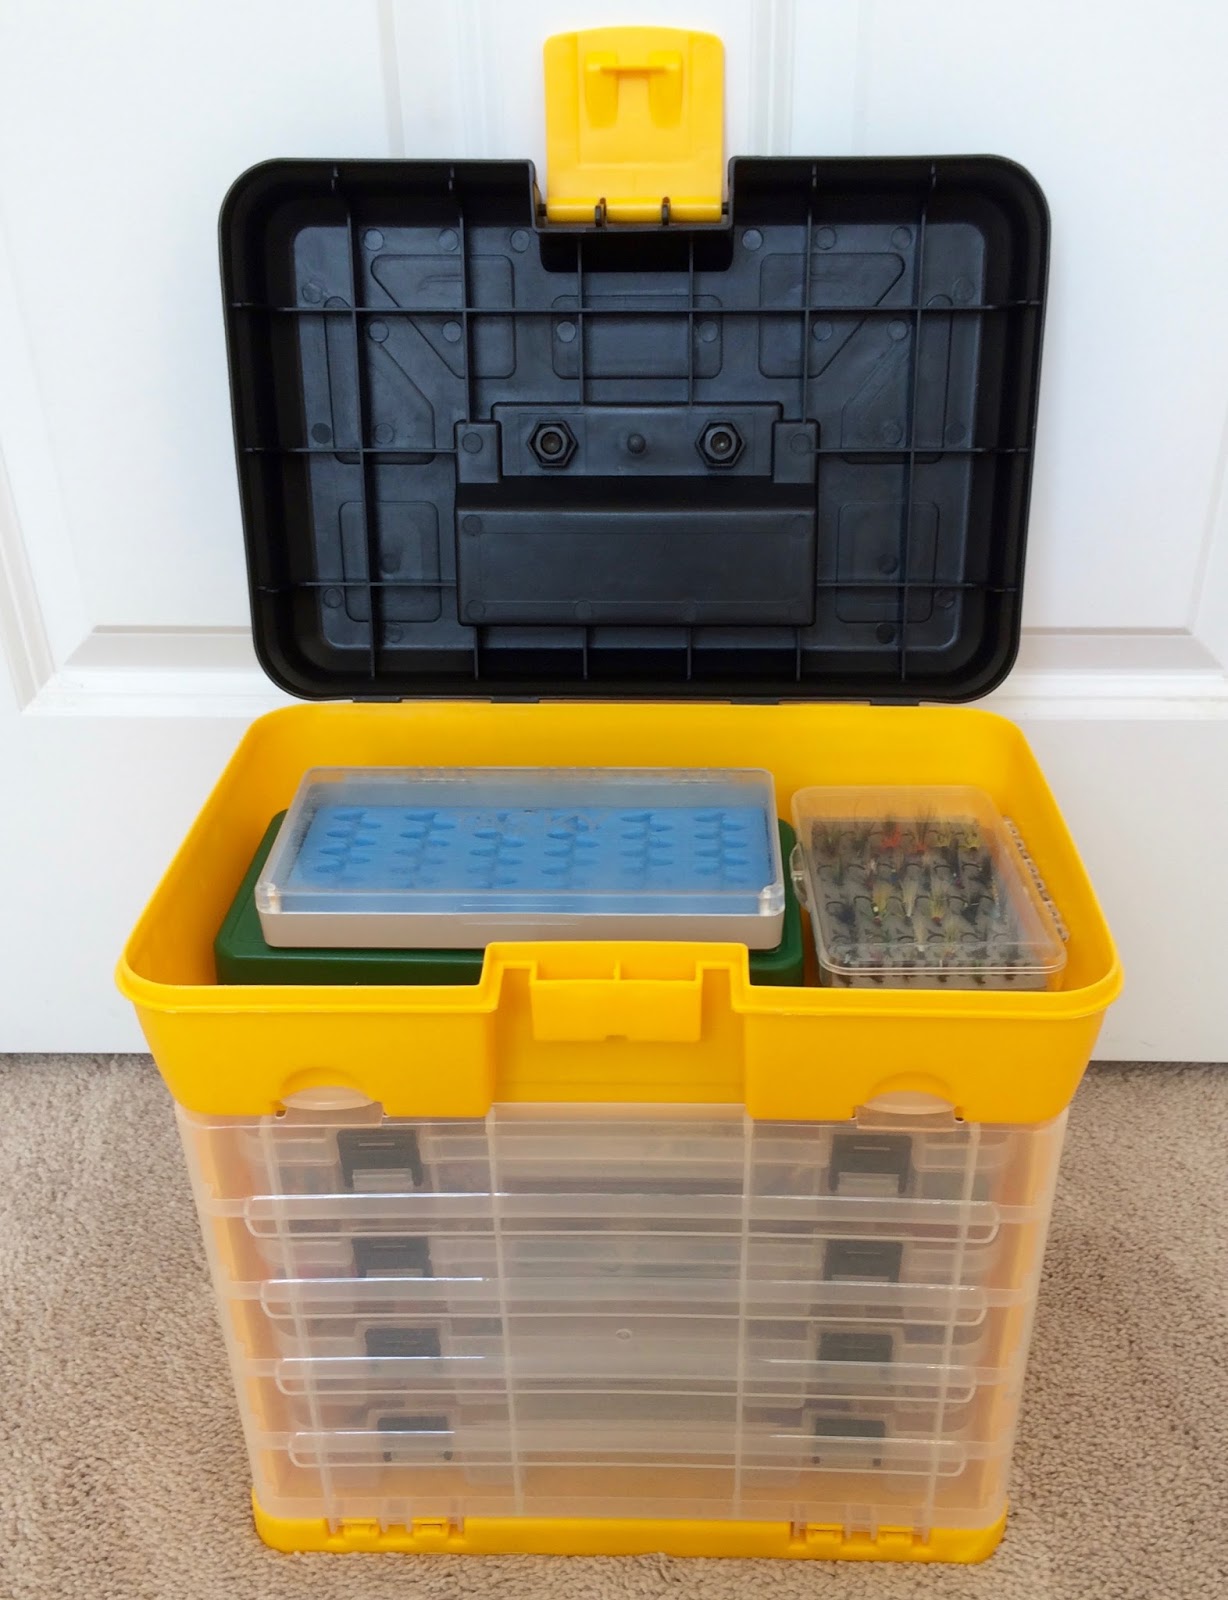 rural king tool box review harbor freight